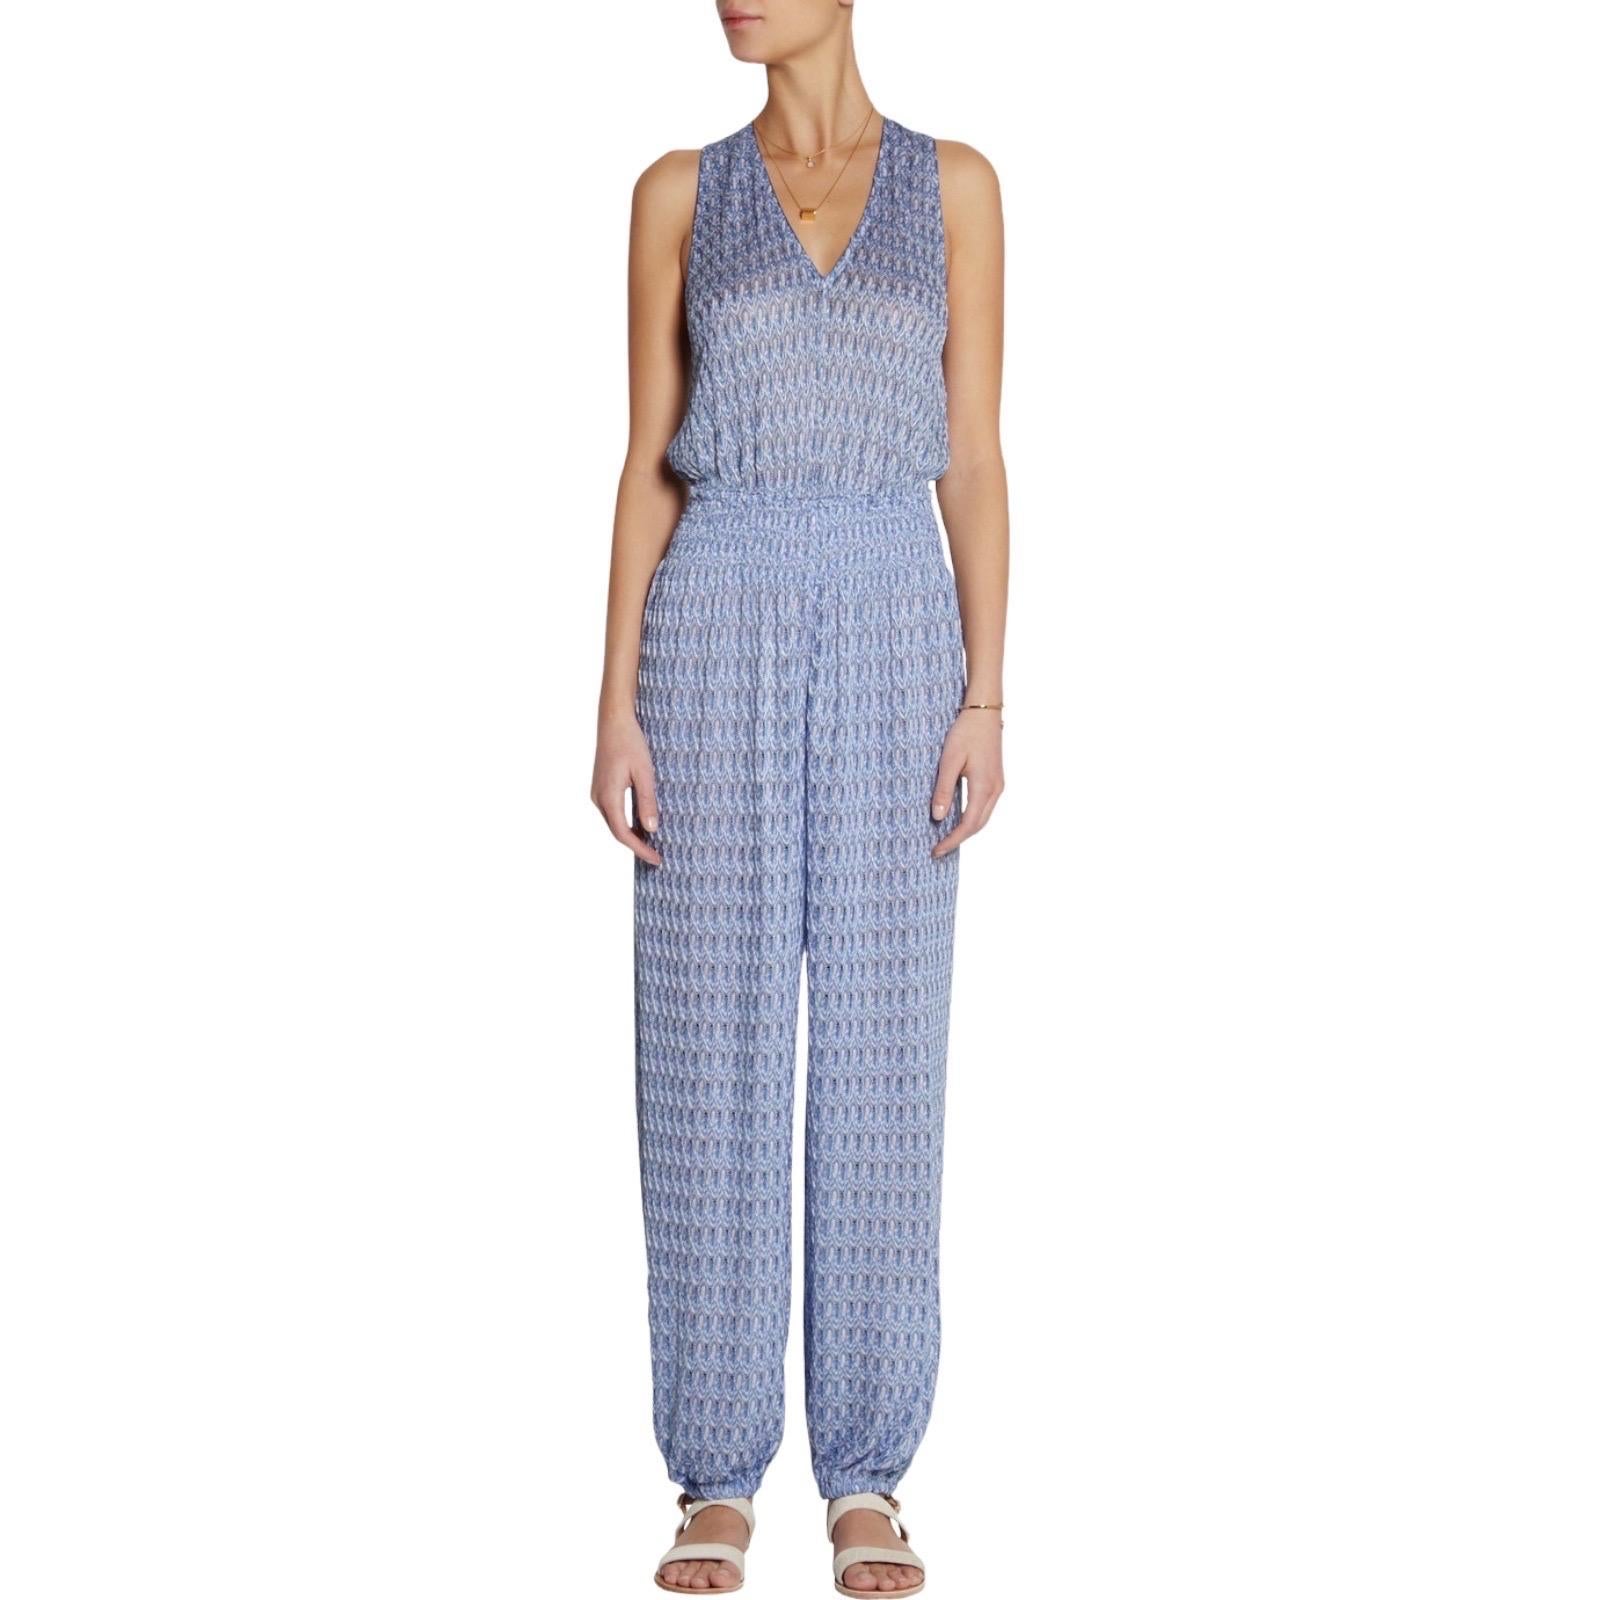 Missoni's '70s-style silhouettes have a cult following, and this blue and white crochet-knit jumpsuit has a relaxed wide-leg cut and flattering V-neck. The elasticated cuffs and smocked waist make it easy to slip it over your bikini after a day at